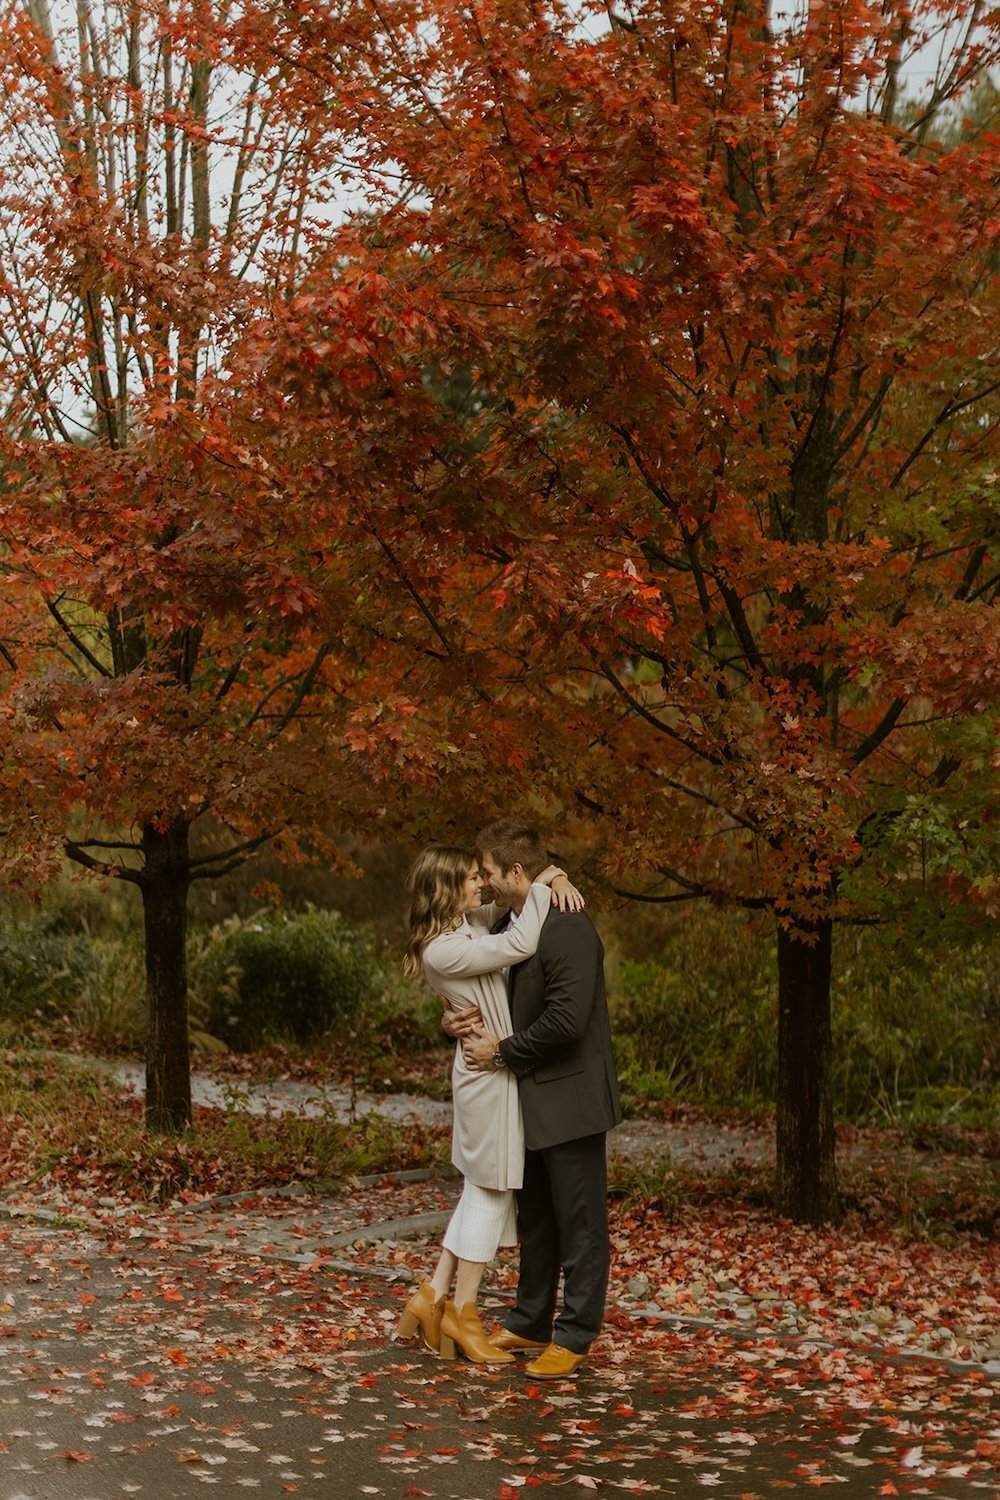  The couple share a moment under the fall foliage sharing a moment forehead to forehead.  